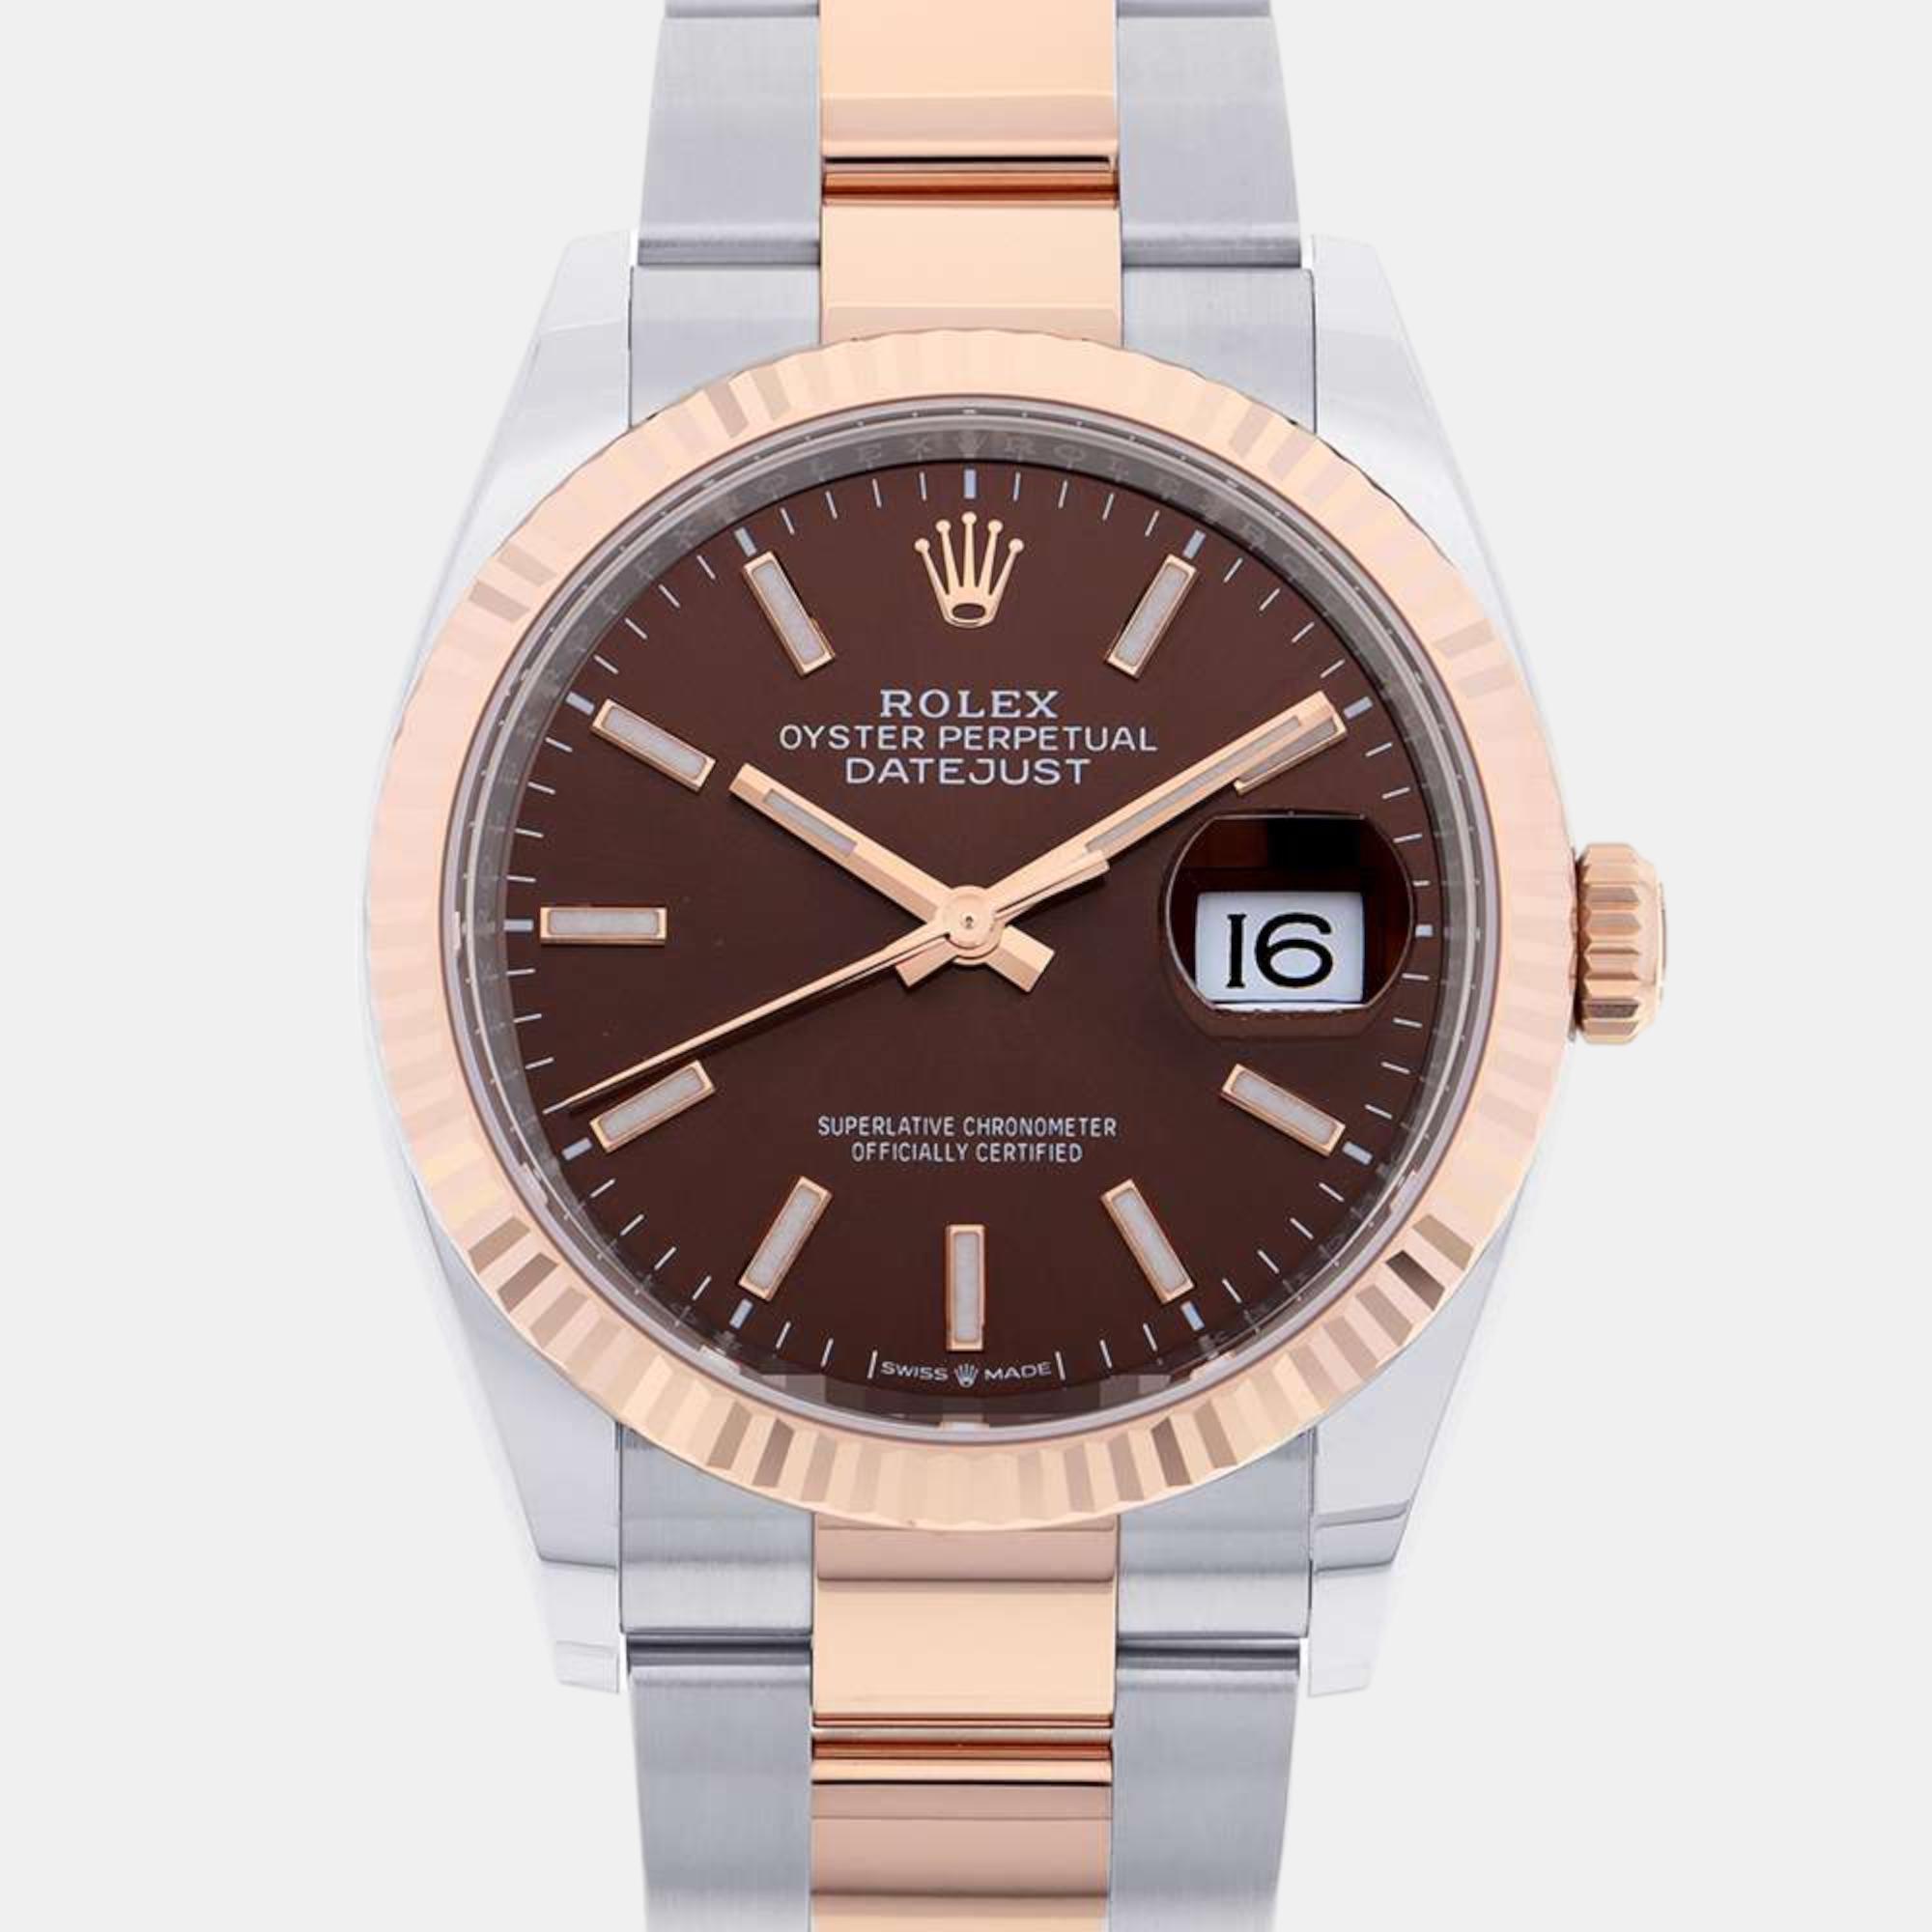 Rolex brown 18k rose gold stainless steel datejust 126231 automatic men's wristwatch 36 mm